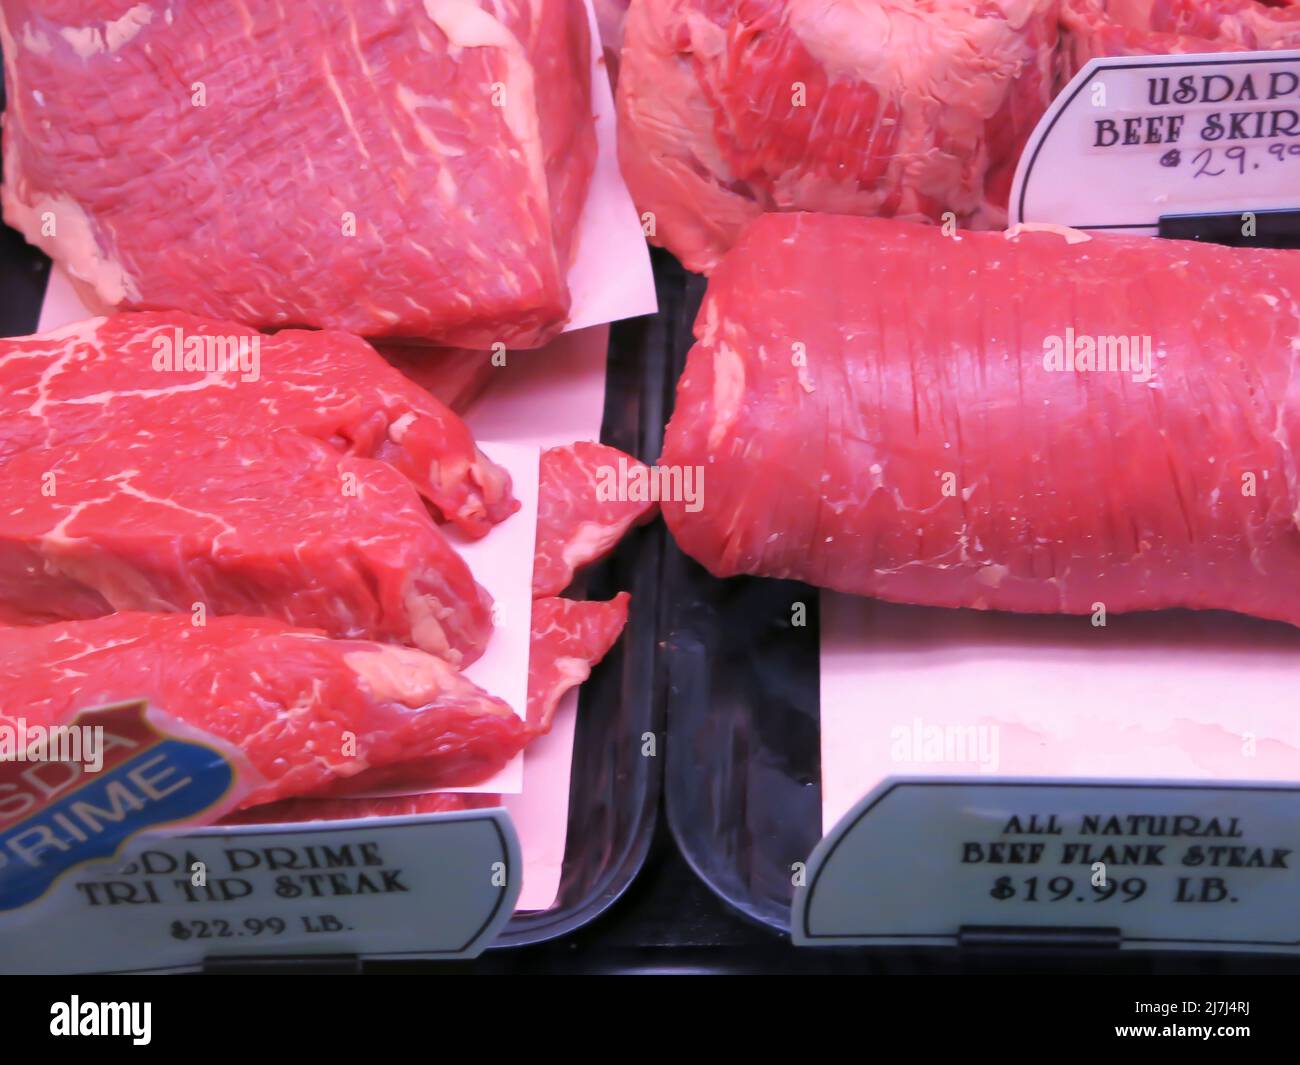 Meat on Display at Market that are Ready for Purchase Stock Photo